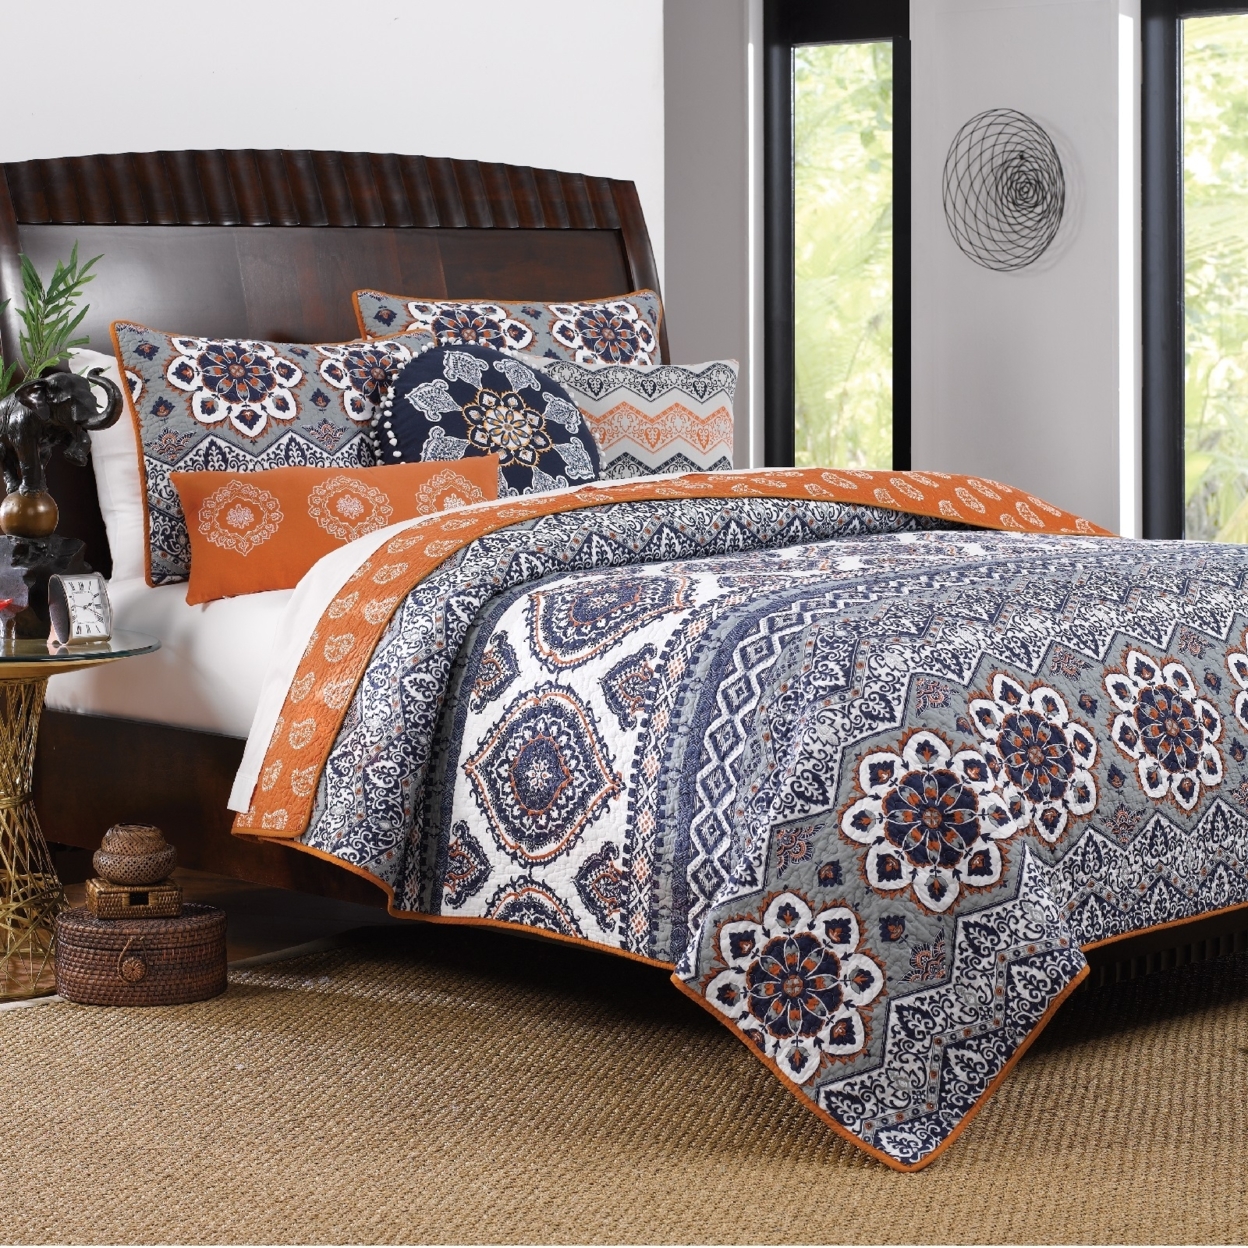 Damask Print Queen Quilt Set With Embroidered Pillows, Blue And Orange- Saltoro Sherpi